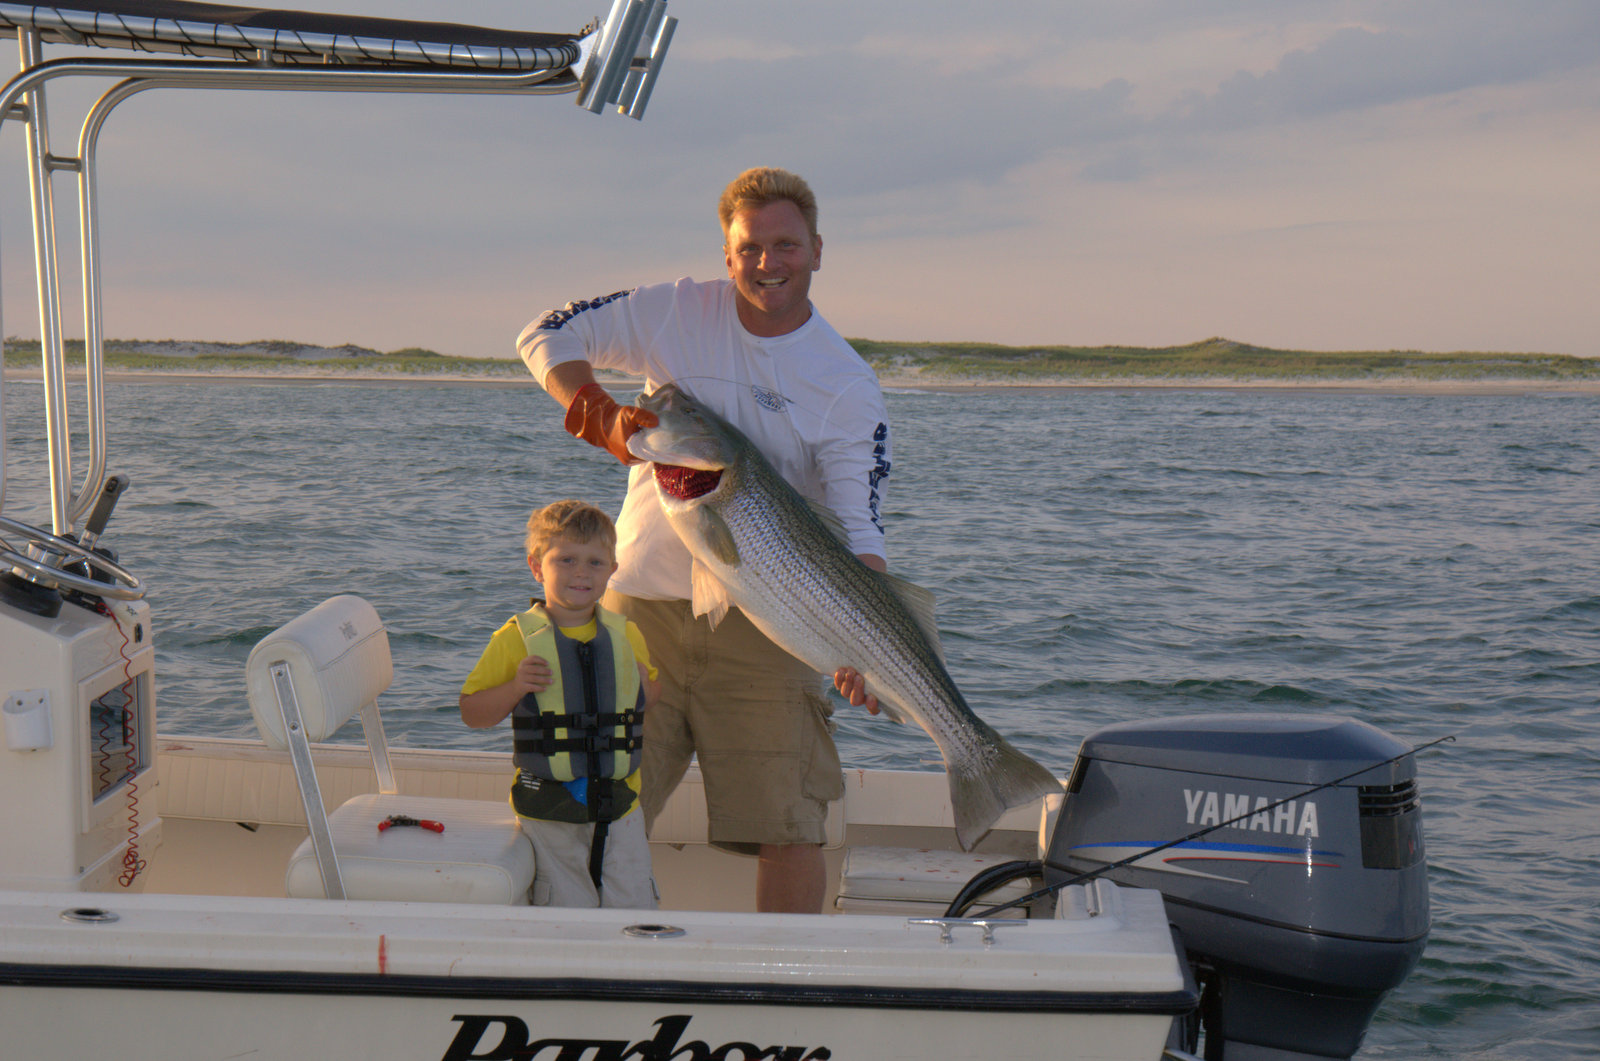 This baby permit was among the critters departing Accabonac Harbor recently